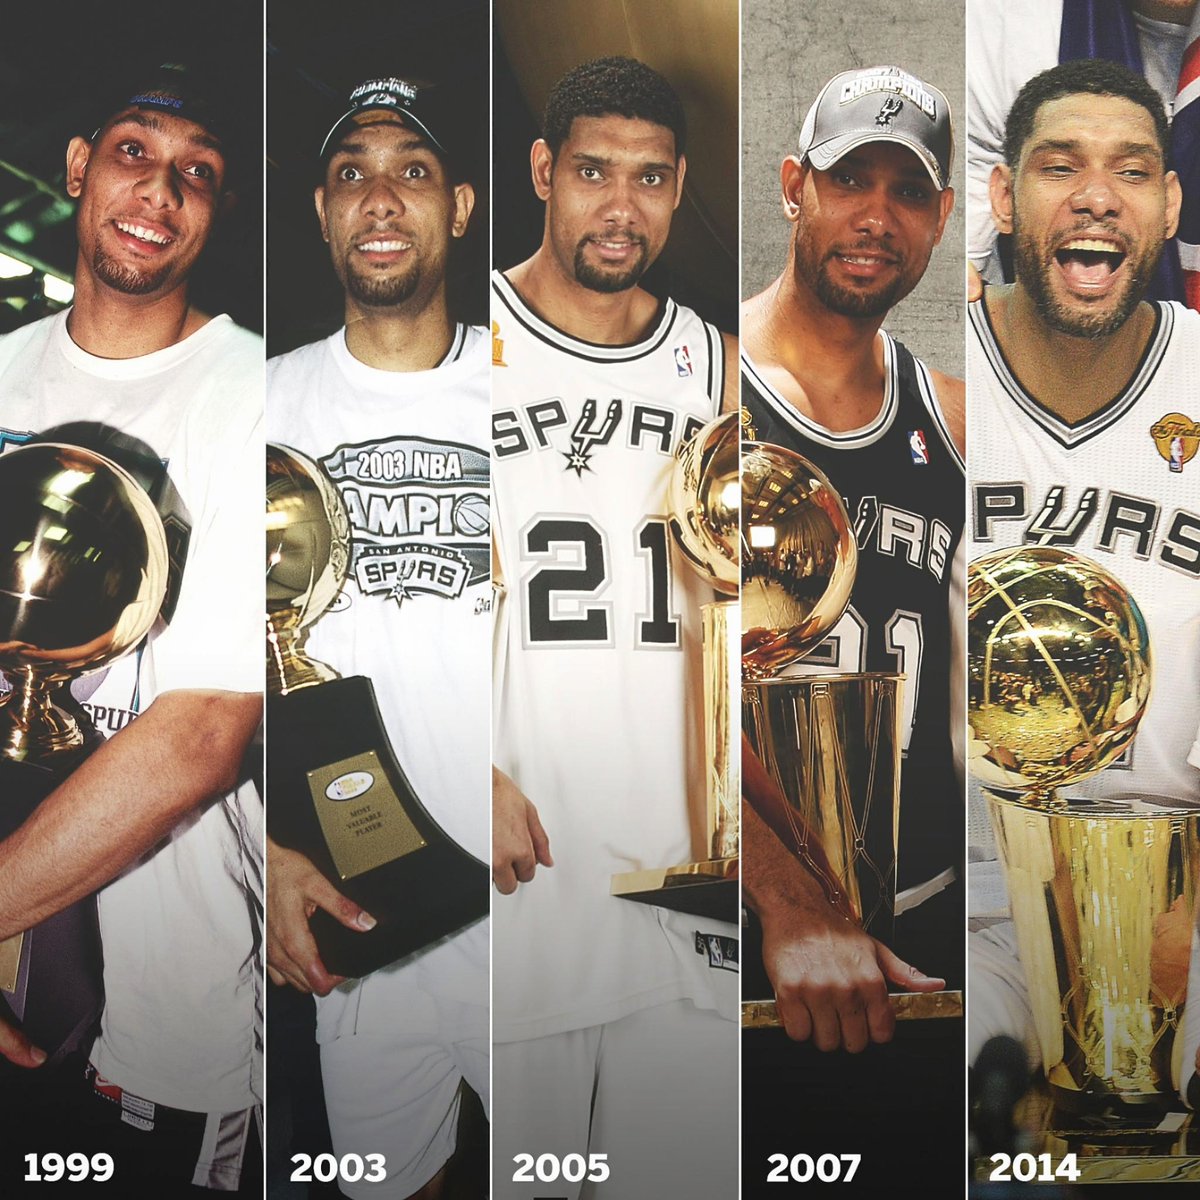 Tim Duncan winning championships in three different decades doesn't get talked about enough